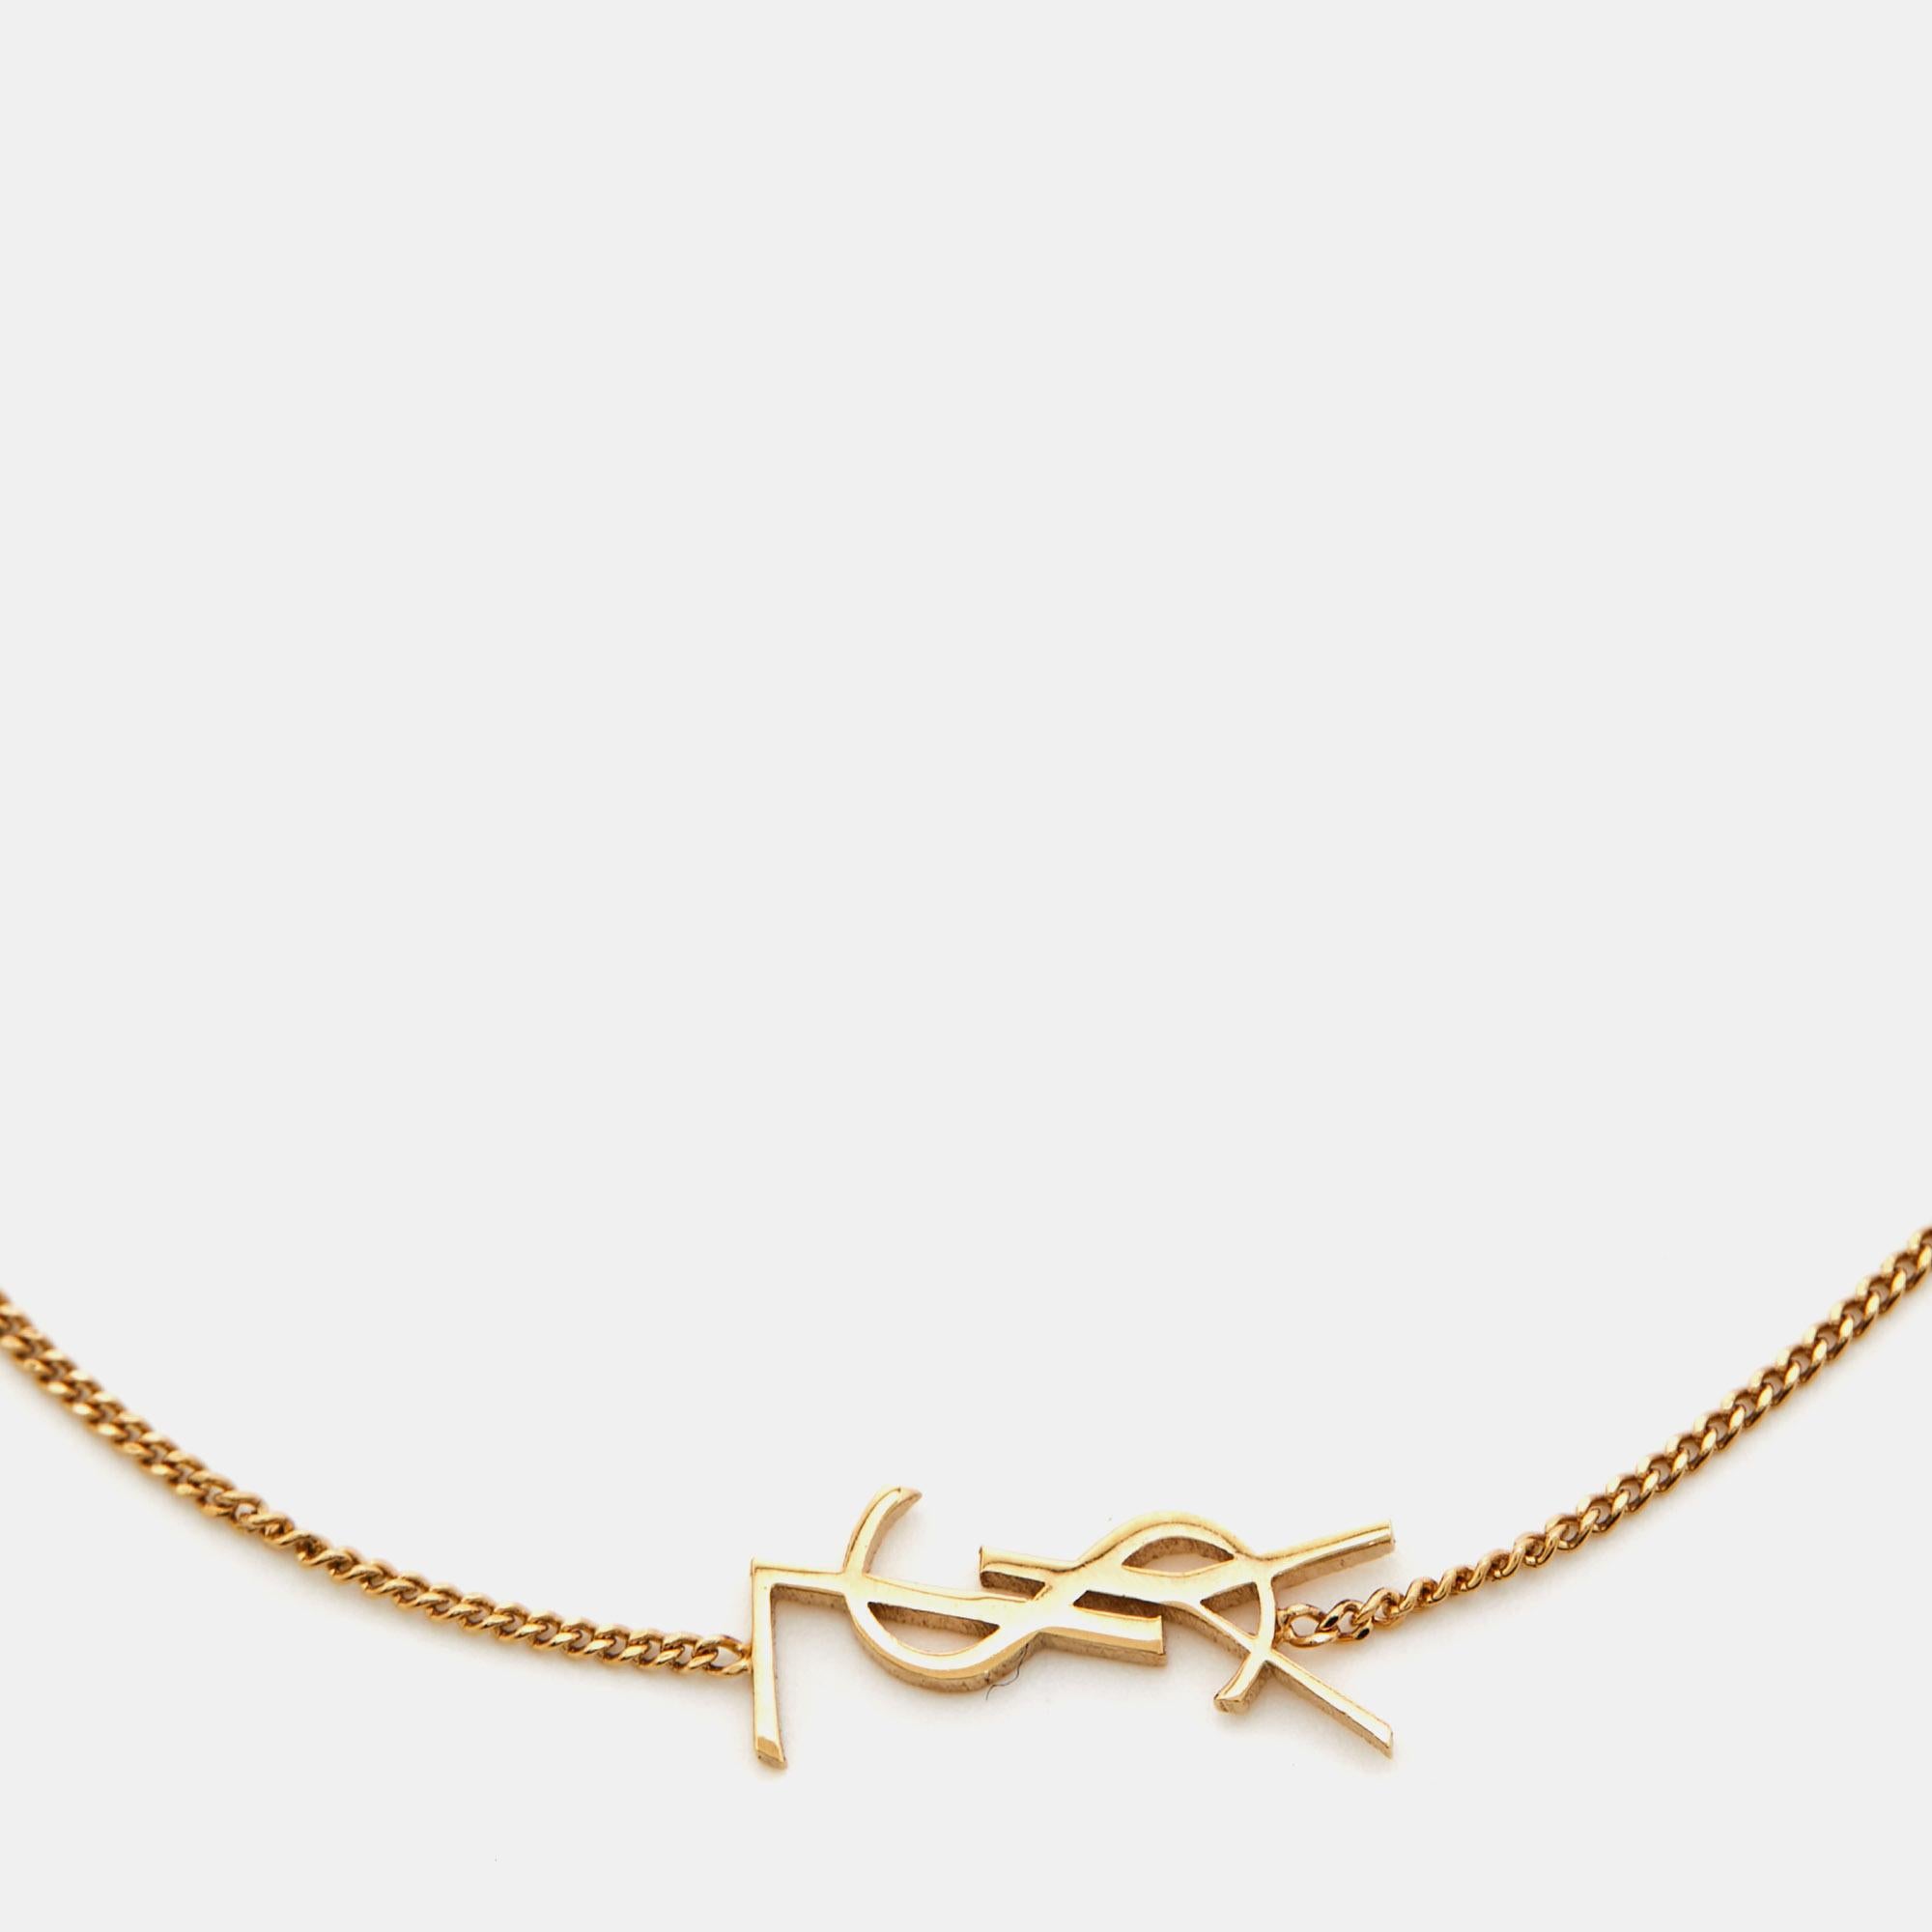 A simple chain in gold-tone metal is added with the iconic YSL logo to make this Opyum bracelet a charming accessory. It is light and comfortable.

